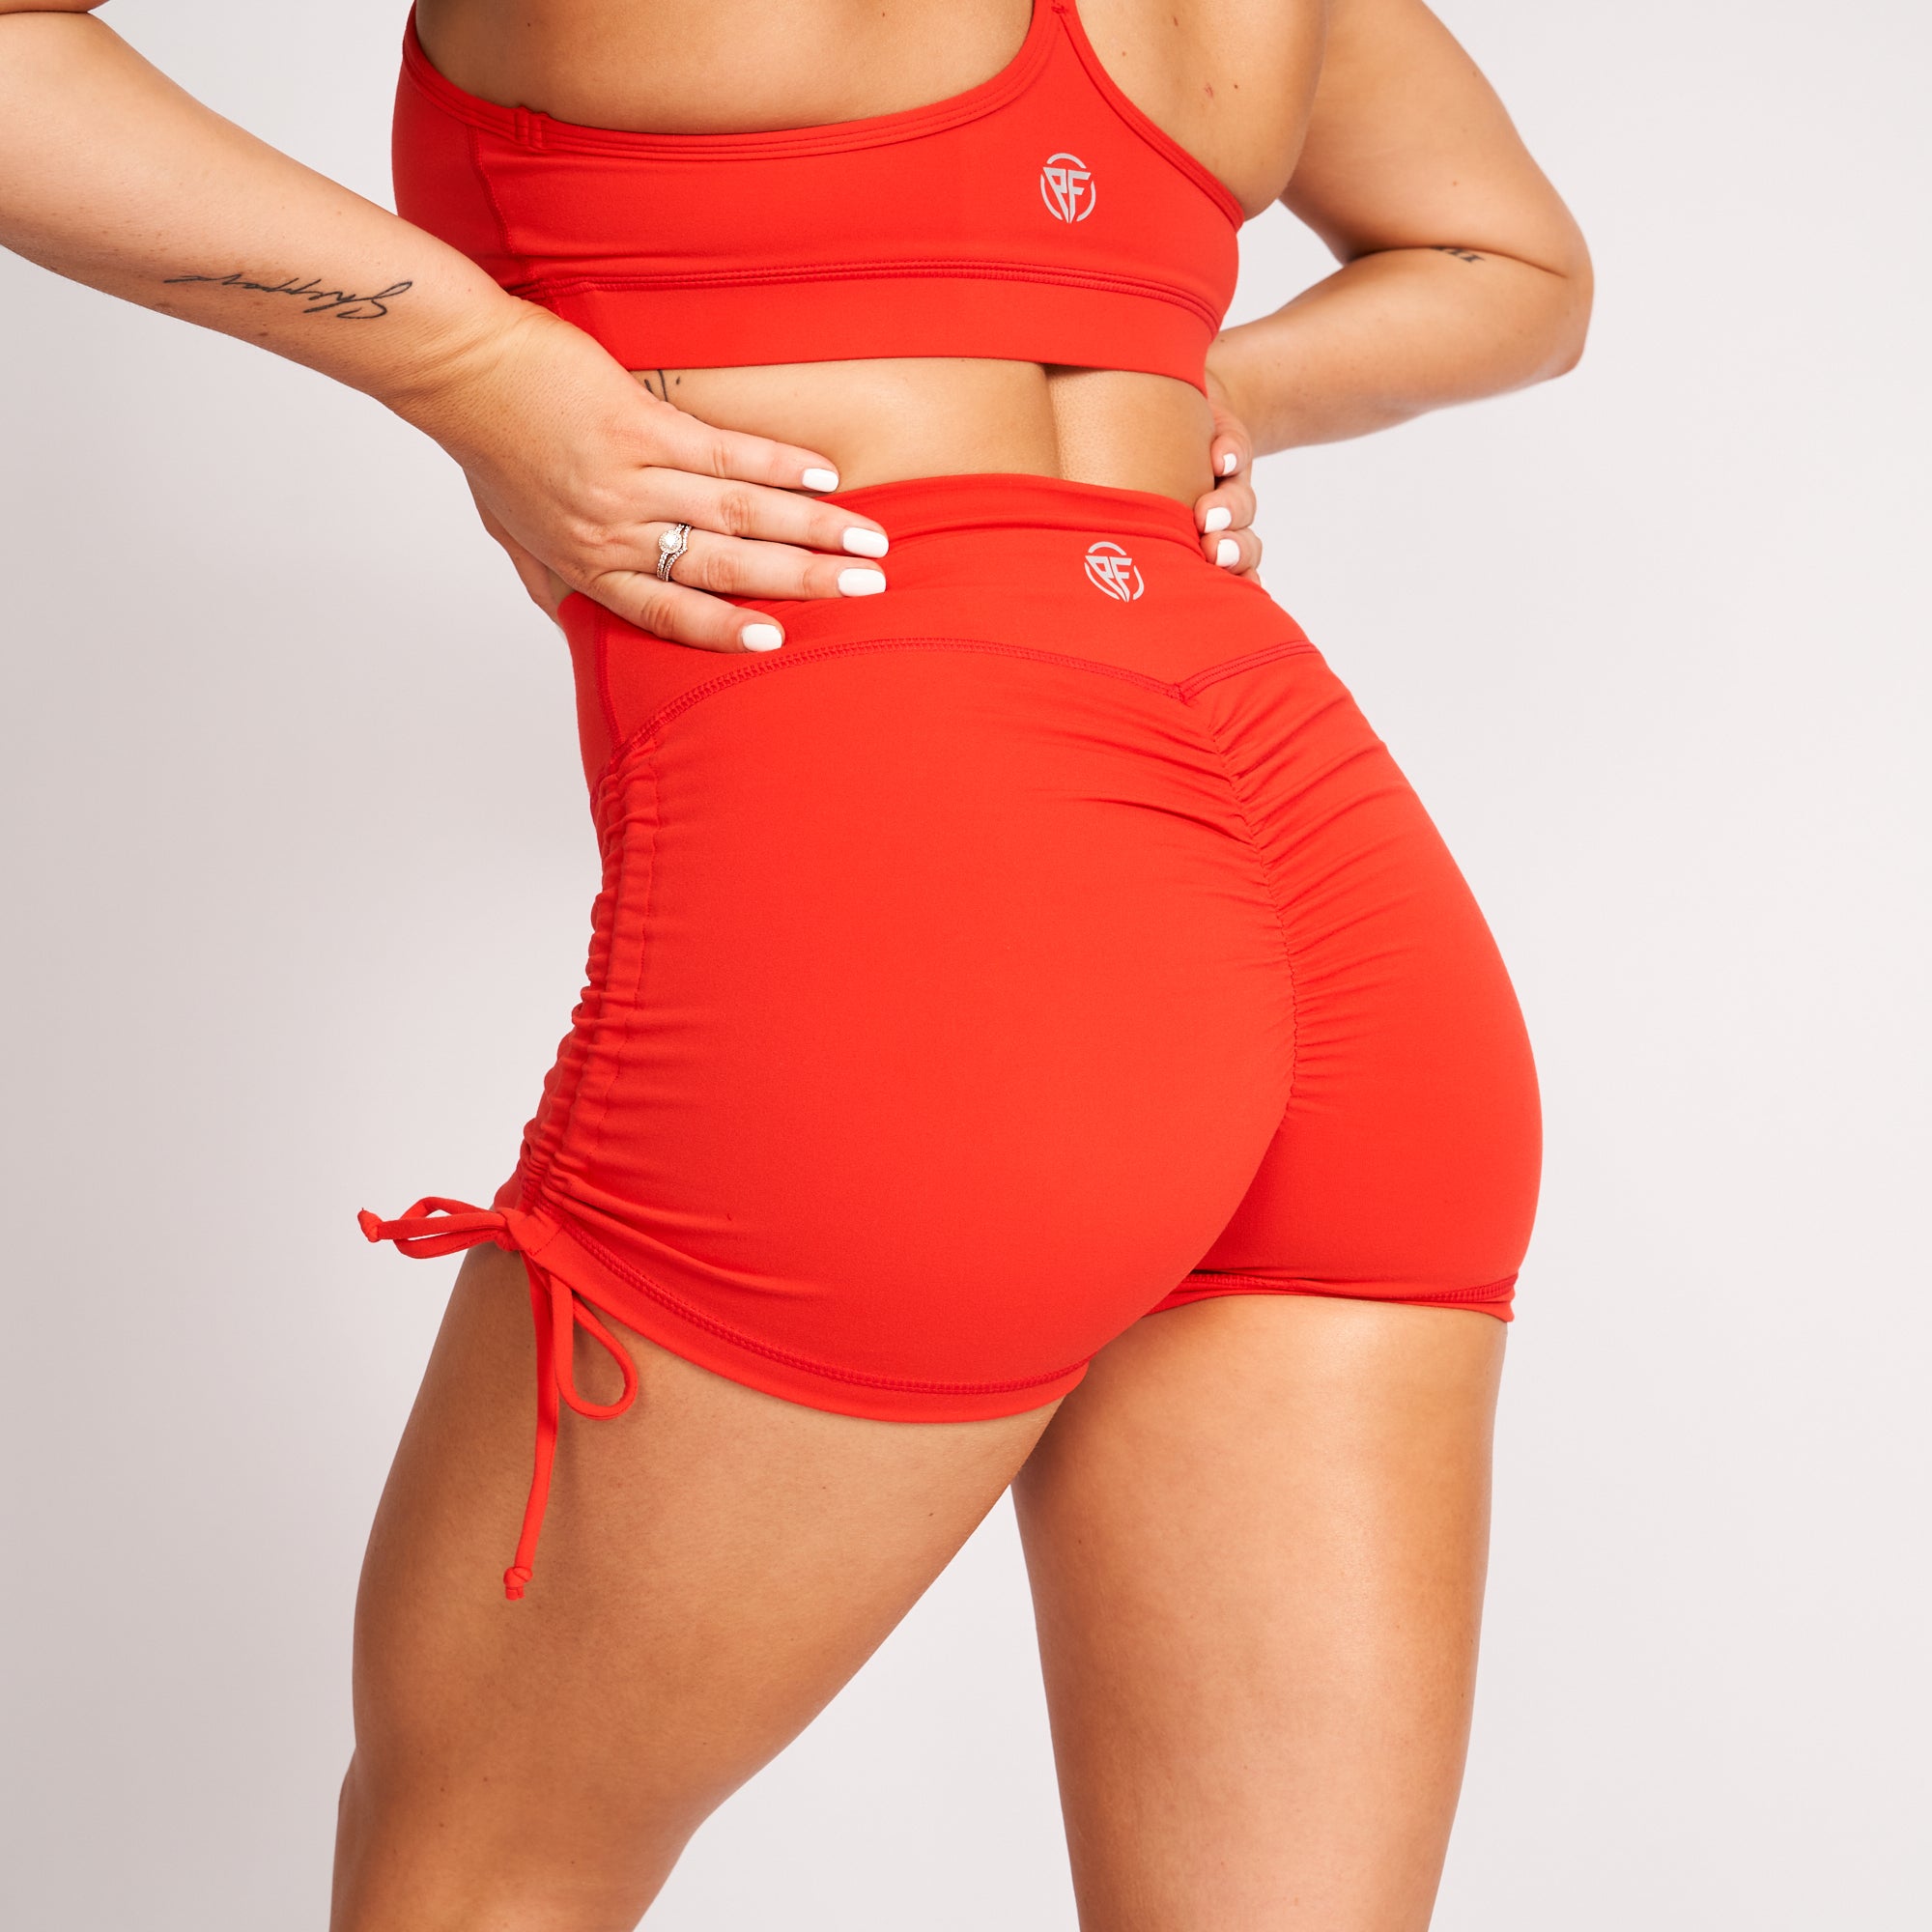 Contour Scrunch Booty Shorts - Red